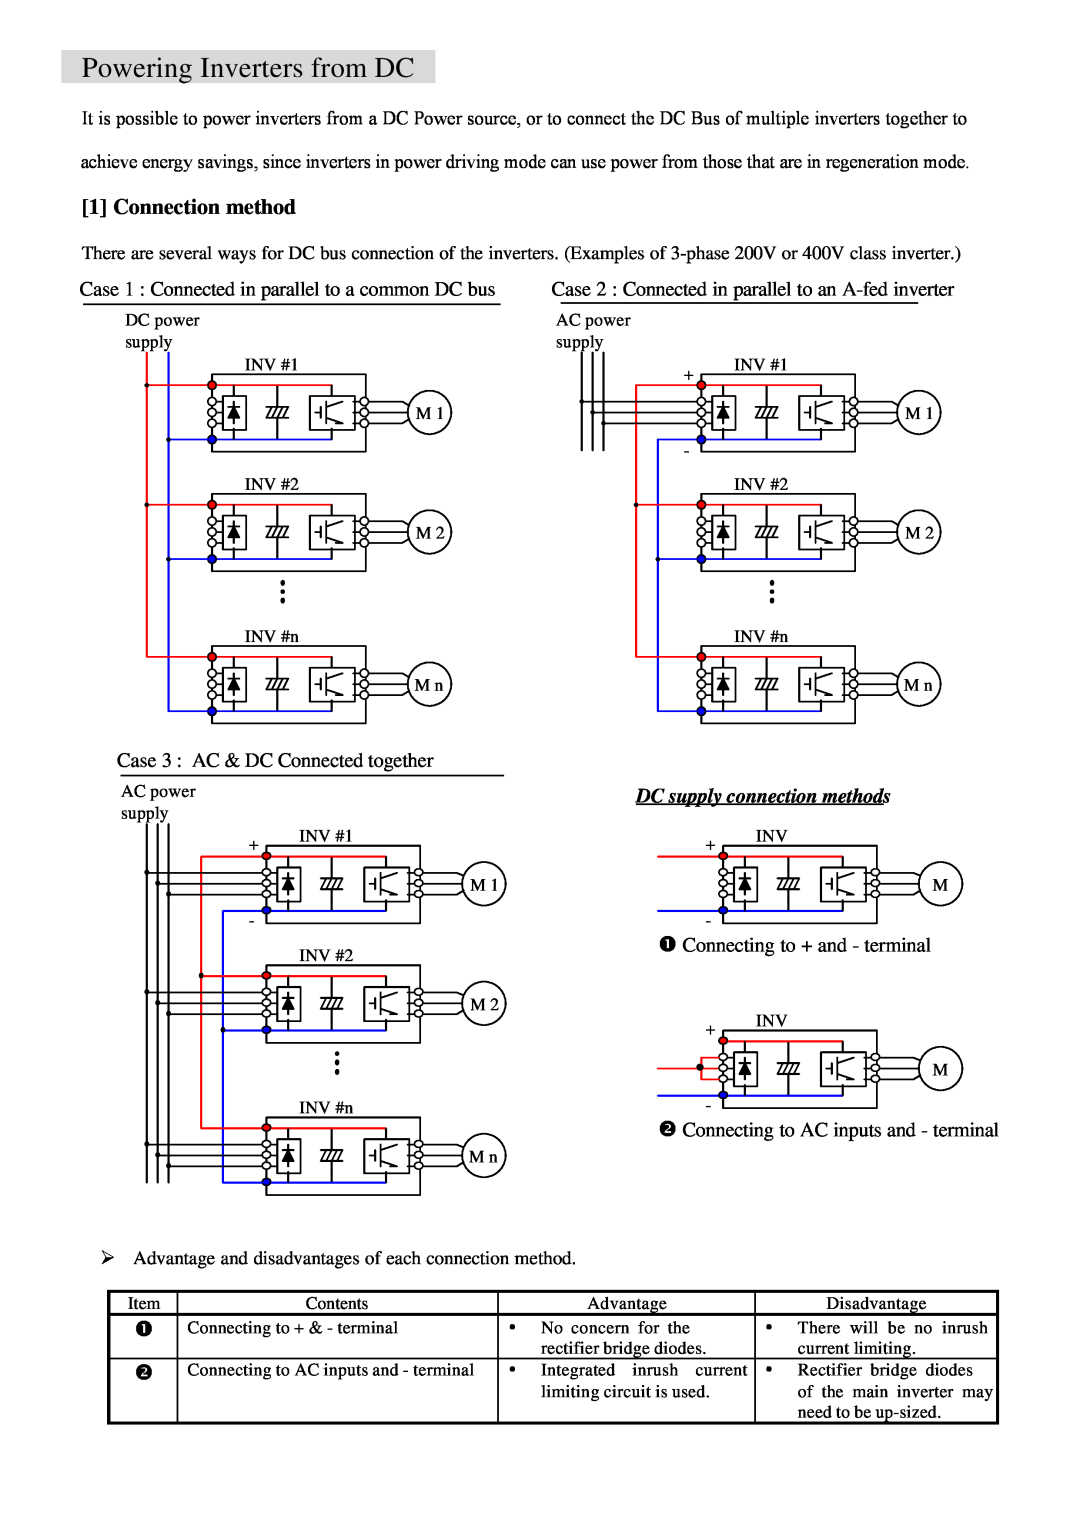 Hitachi AN091802-1 Connection method, Powering Inverters from DC, Case 1 Connected in parallel to a common DC bus 